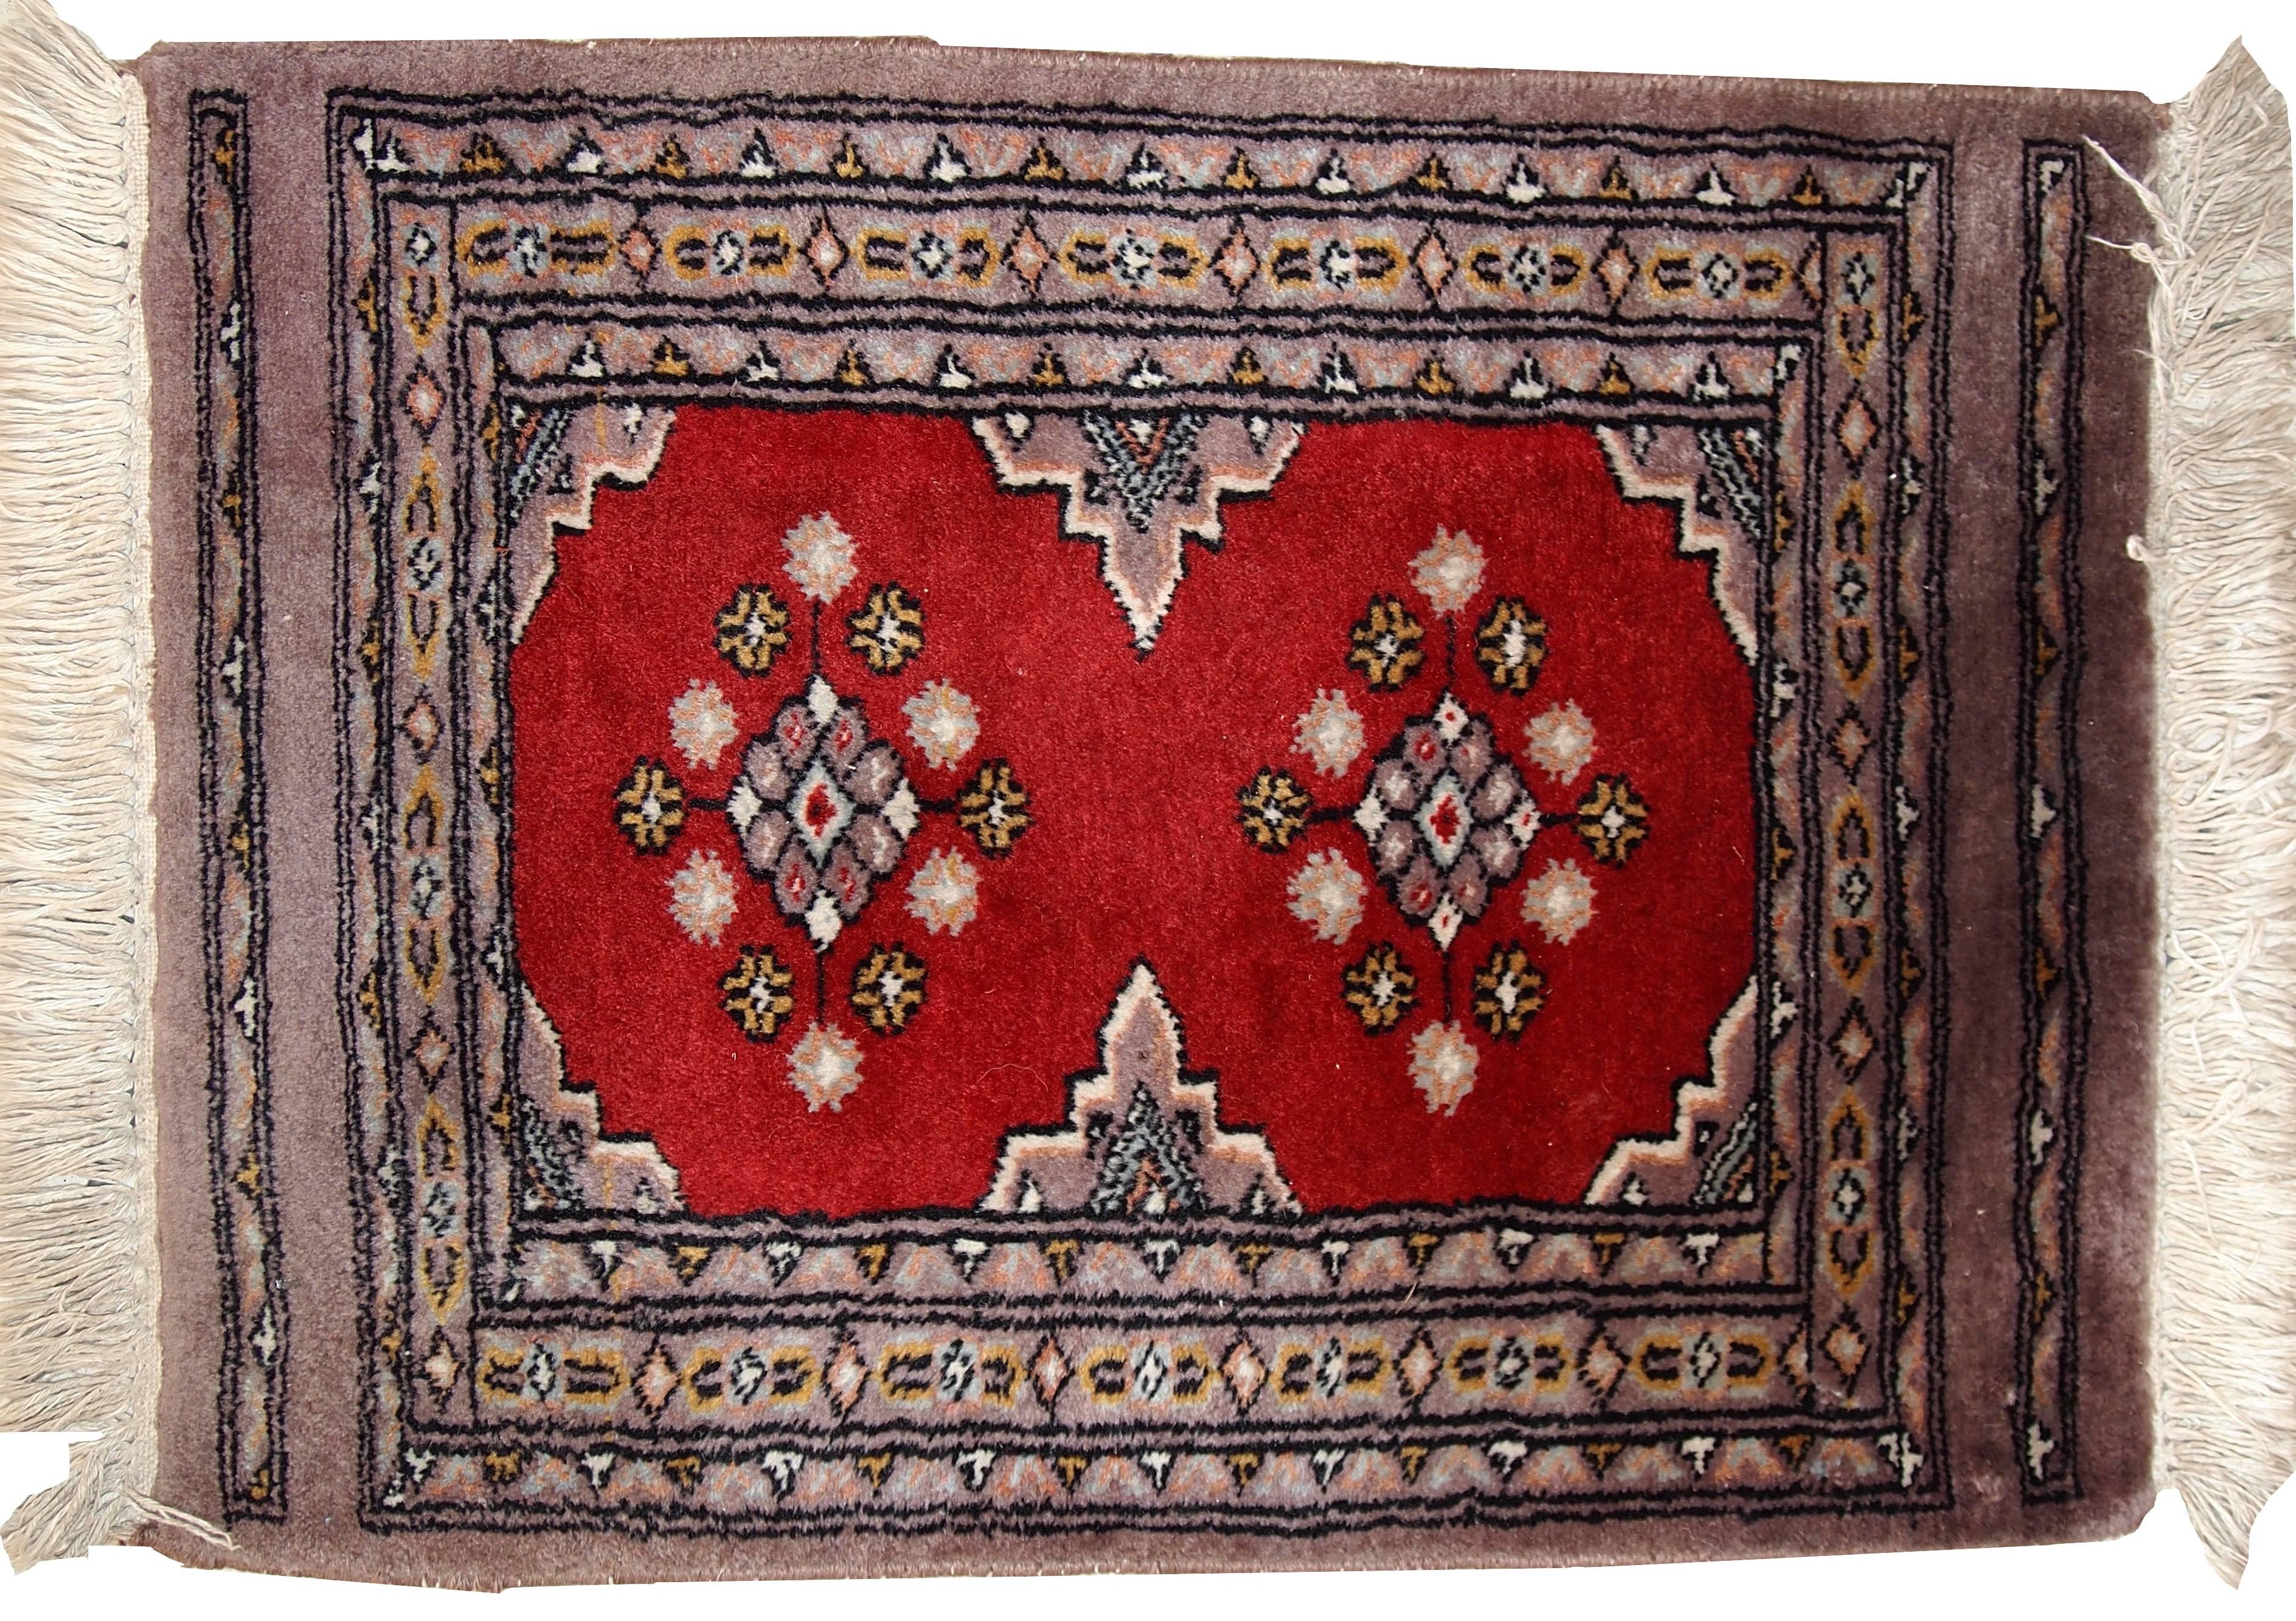 Vintage handmade Uzbek Bukhara rug in original condition. The rug made in bright red color for the field with two medallions in the centre Border side made in burgundy color with tribal miniature design on it. The condition of the rug is good and